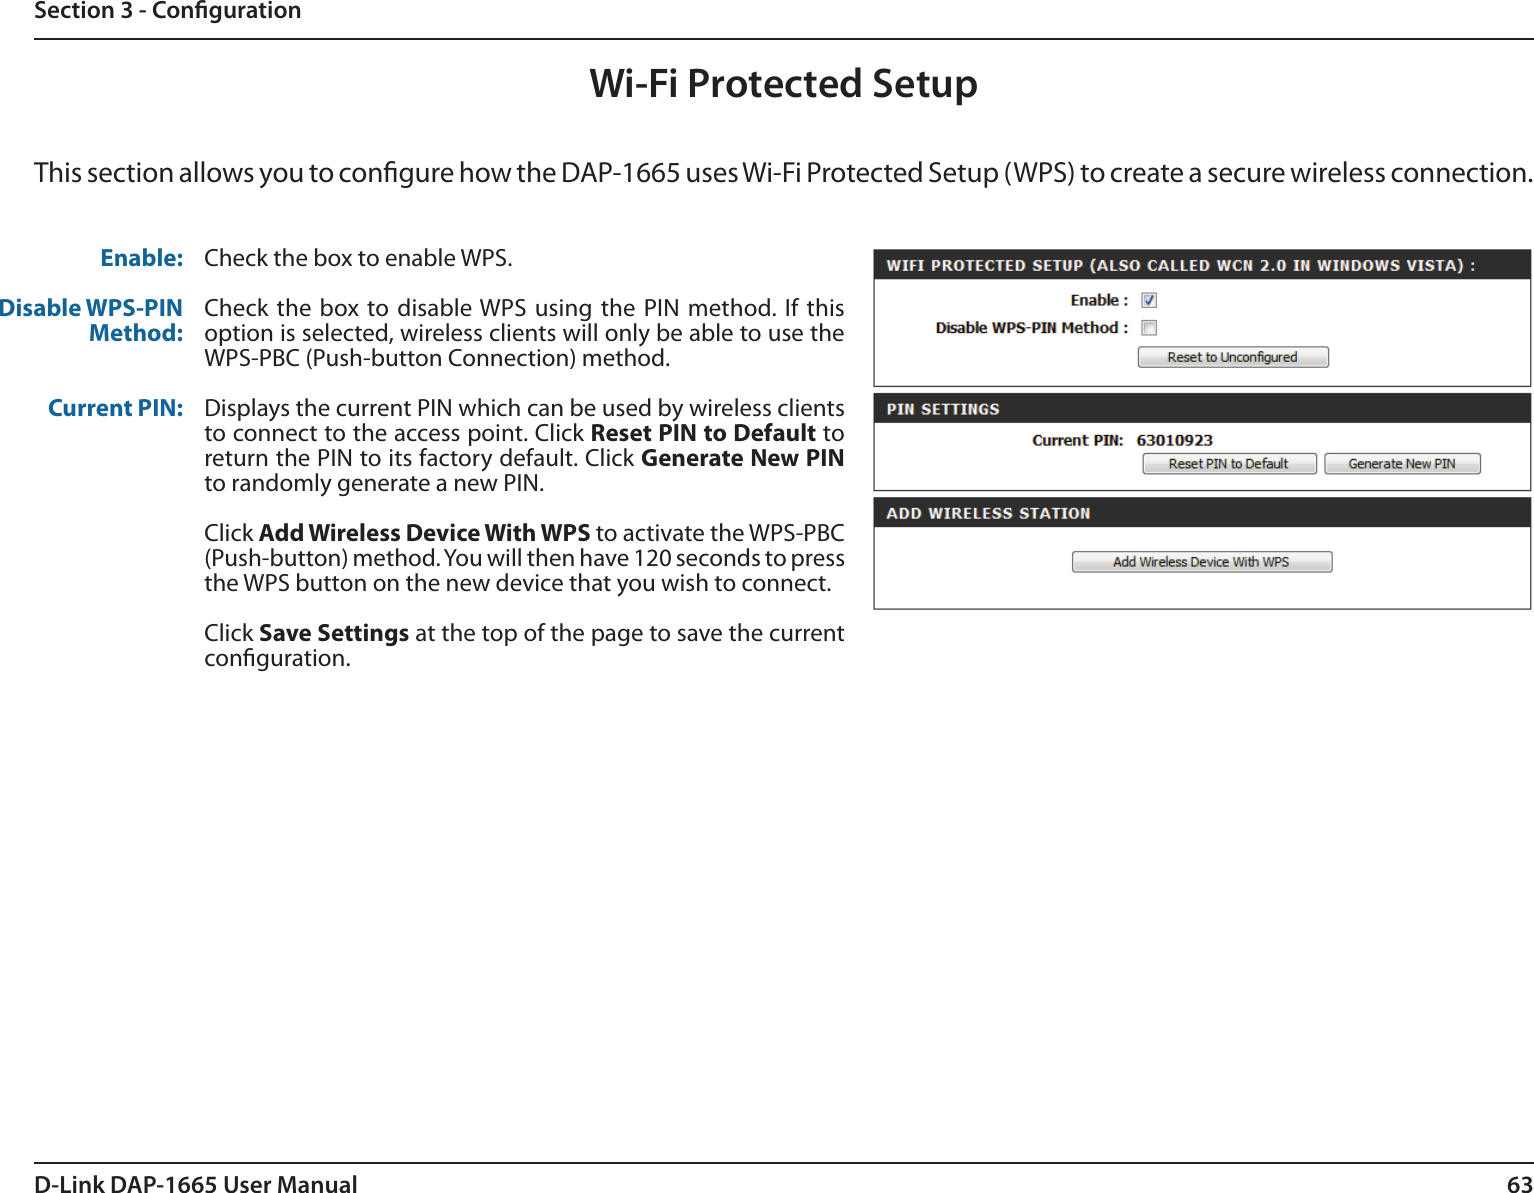 63D-Link DAP-1665 User ManualSection 3 - CongurationWi-Fi Protected SetupThis section allows you to congure how the DAP-1665 uses Wi-Fi Protected Setup (WPS) to create a secure wireless connection. Enable:Disable WPS-PIN Method:Current PIN:Check the box to enable WPS.Check the box to disable WPS  using the PIN method. If this option is selected, wireless clients will only be able to use the WPS-PBC (Push-button Connection) method.Displays the current PIN which can be used by wireless clients to connect to the access point. Click Reset PIN to Default to return the PIN to its factory default. Click Generate New PIN to randomly generate a new PIN.Click Add Wireless Device With WPS to activate the WPS-PBC (Push-button) method. You will then have 120 seconds to press the WPS button on the new device that you wish to connect. Click Save Settings at the top of the page to save the current conguration. 